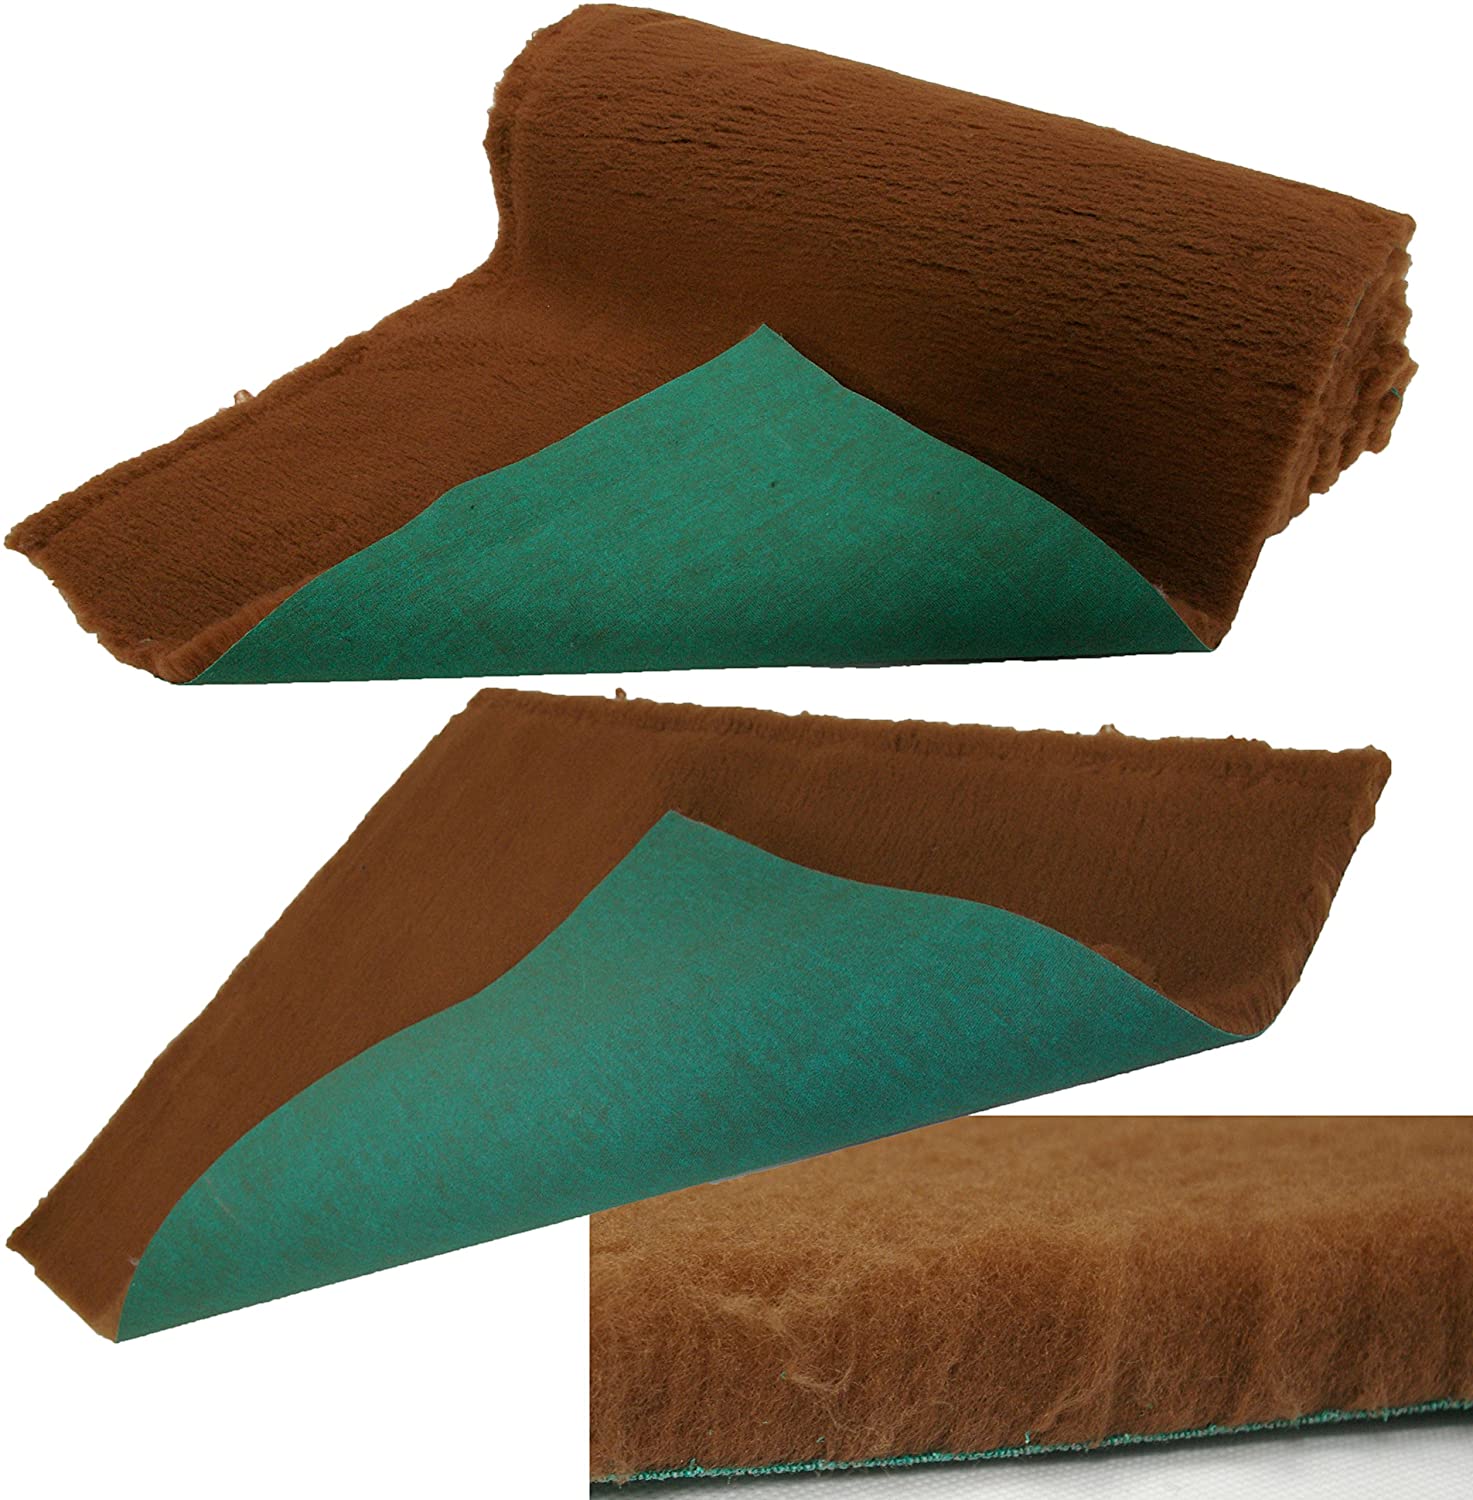 Traditional Brown Vet Bedding roll whelping fleece dog puppy pro bed